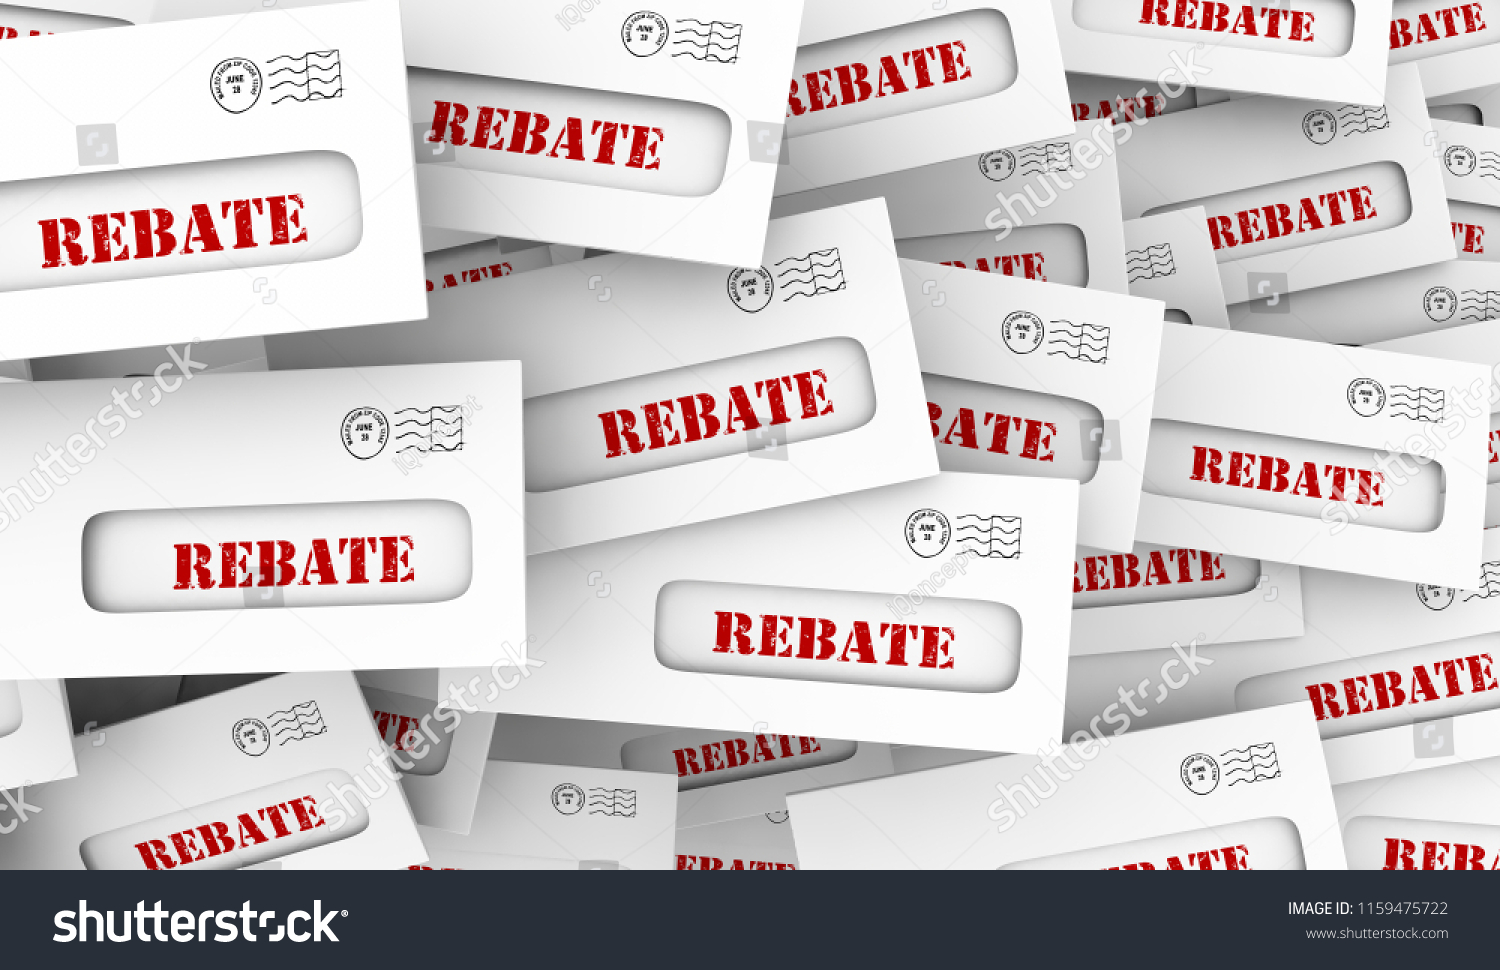 A bunch of cards with the word rebate on them